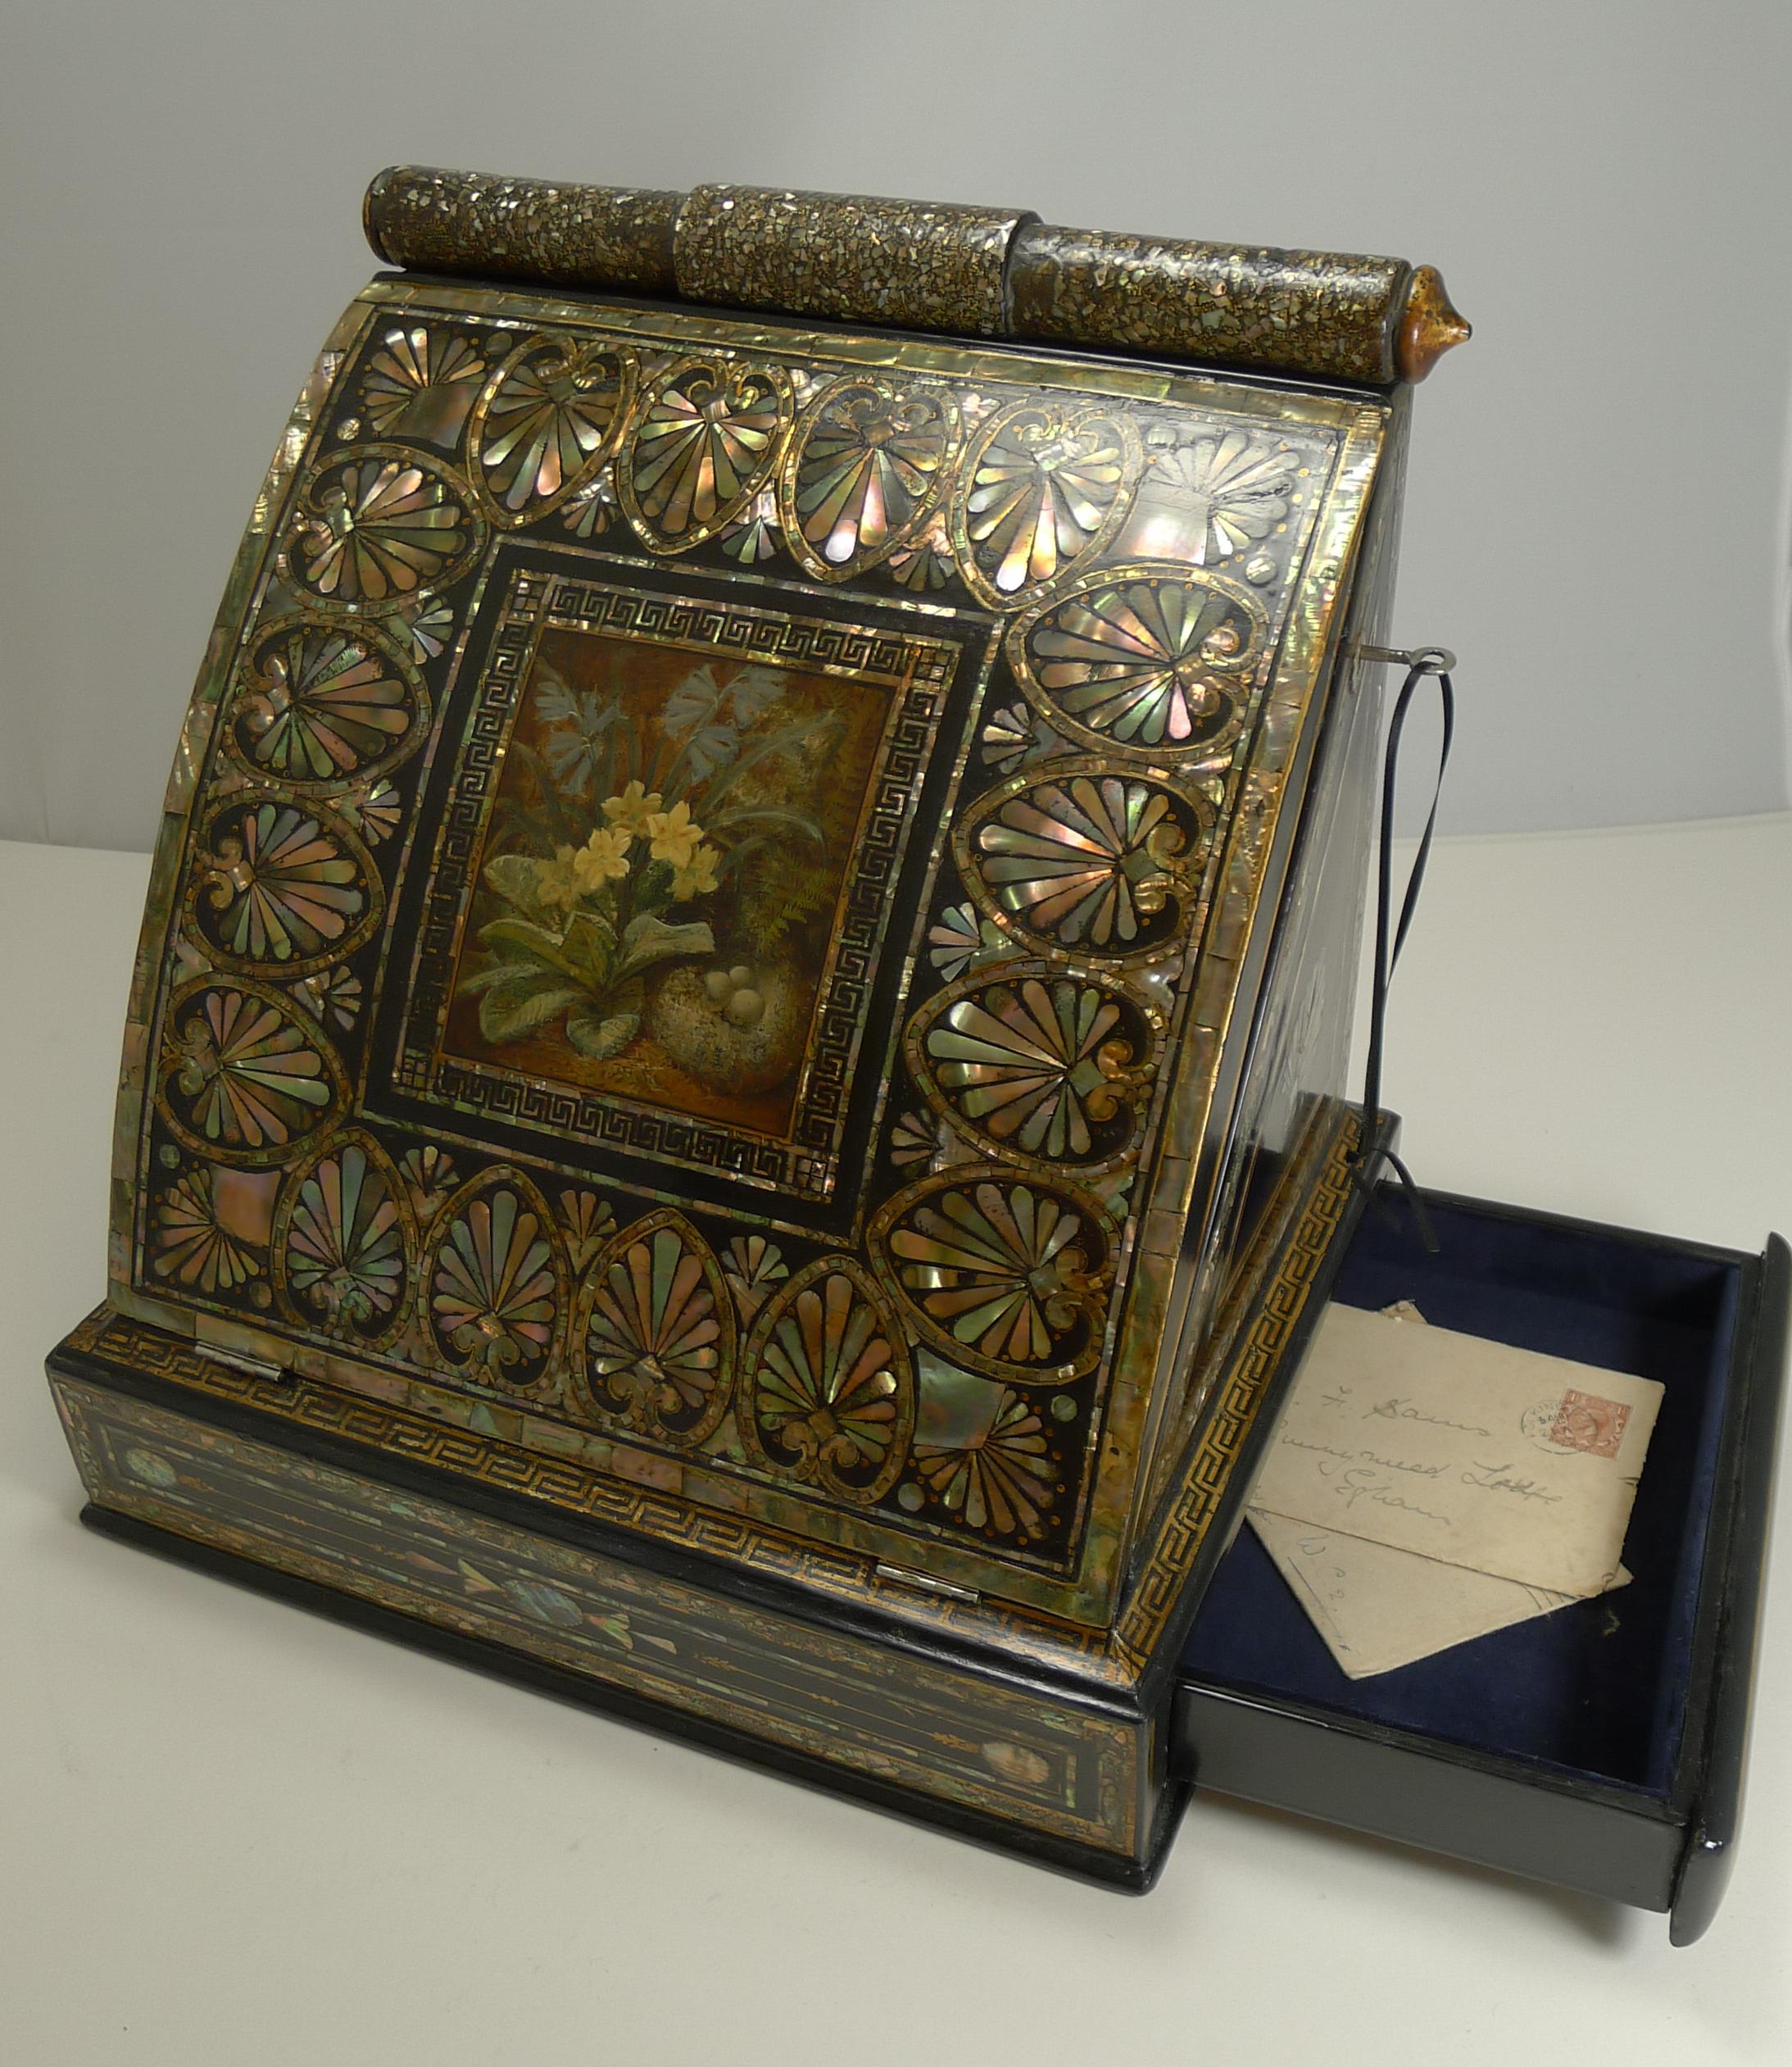 Late 19th Century Fabulous Antique English Mother of Pearl Inlaid Papier Mâché Writing Box